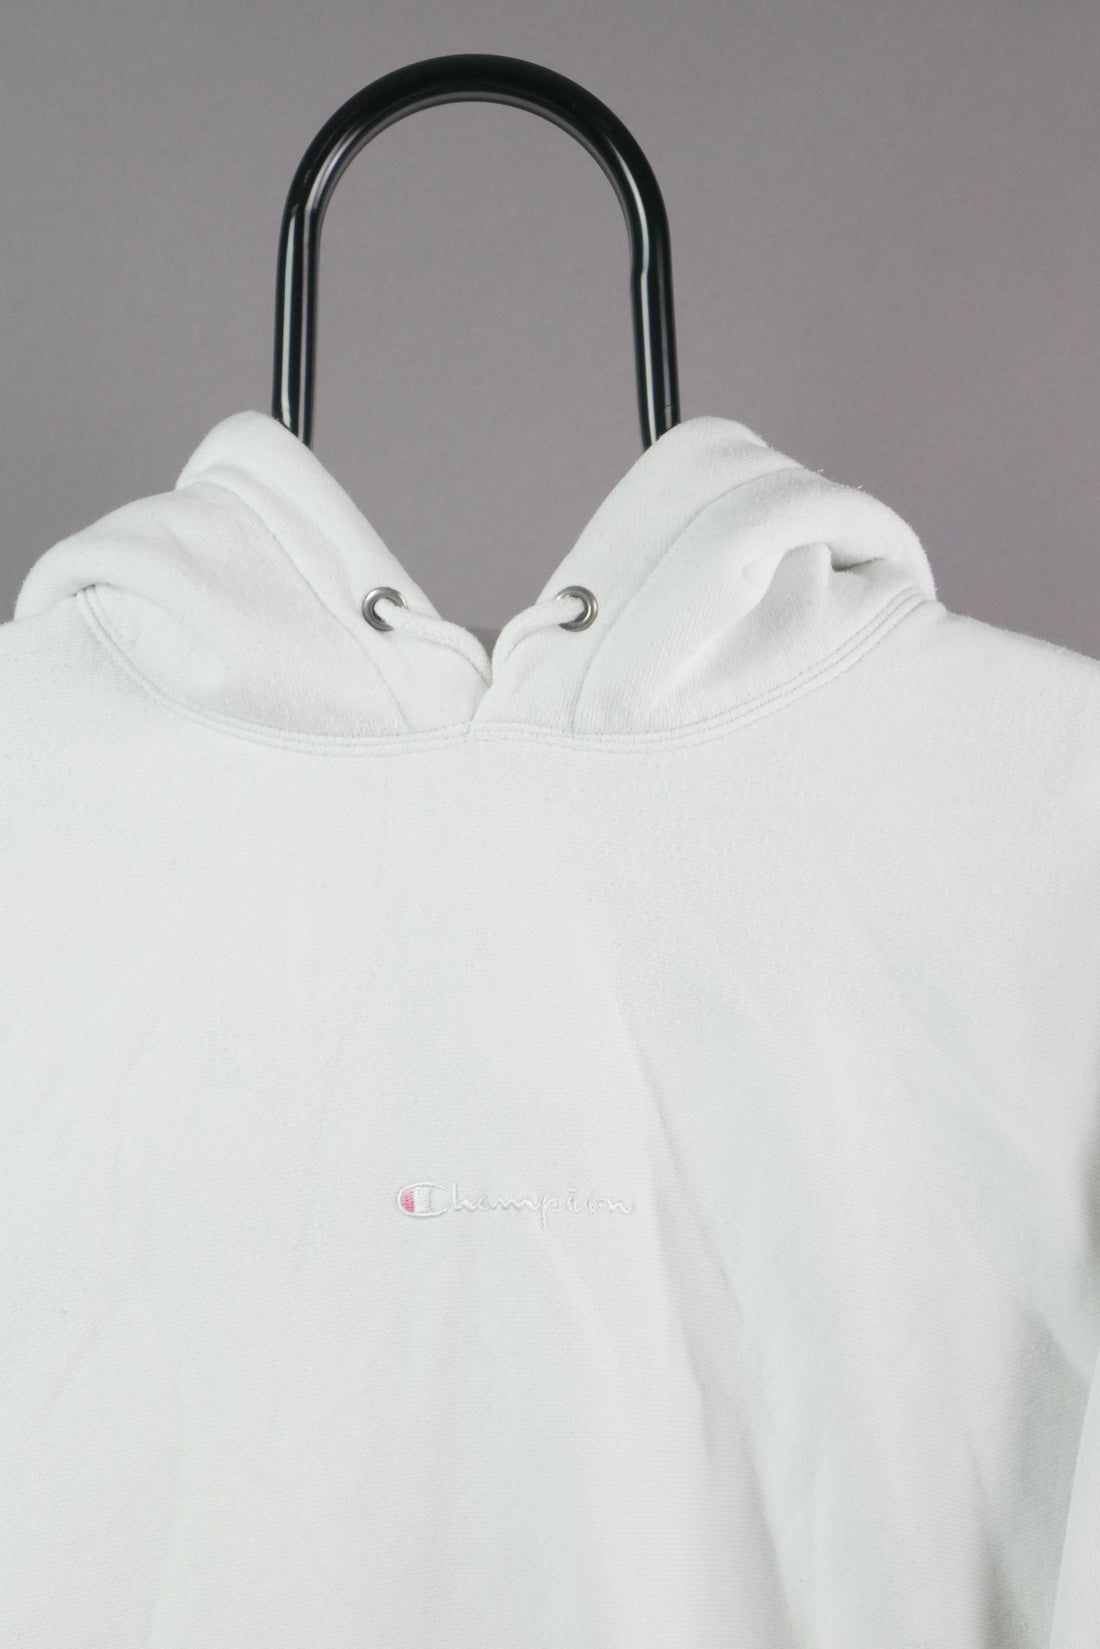 The Champion Reverse Weave Hoodie (S)